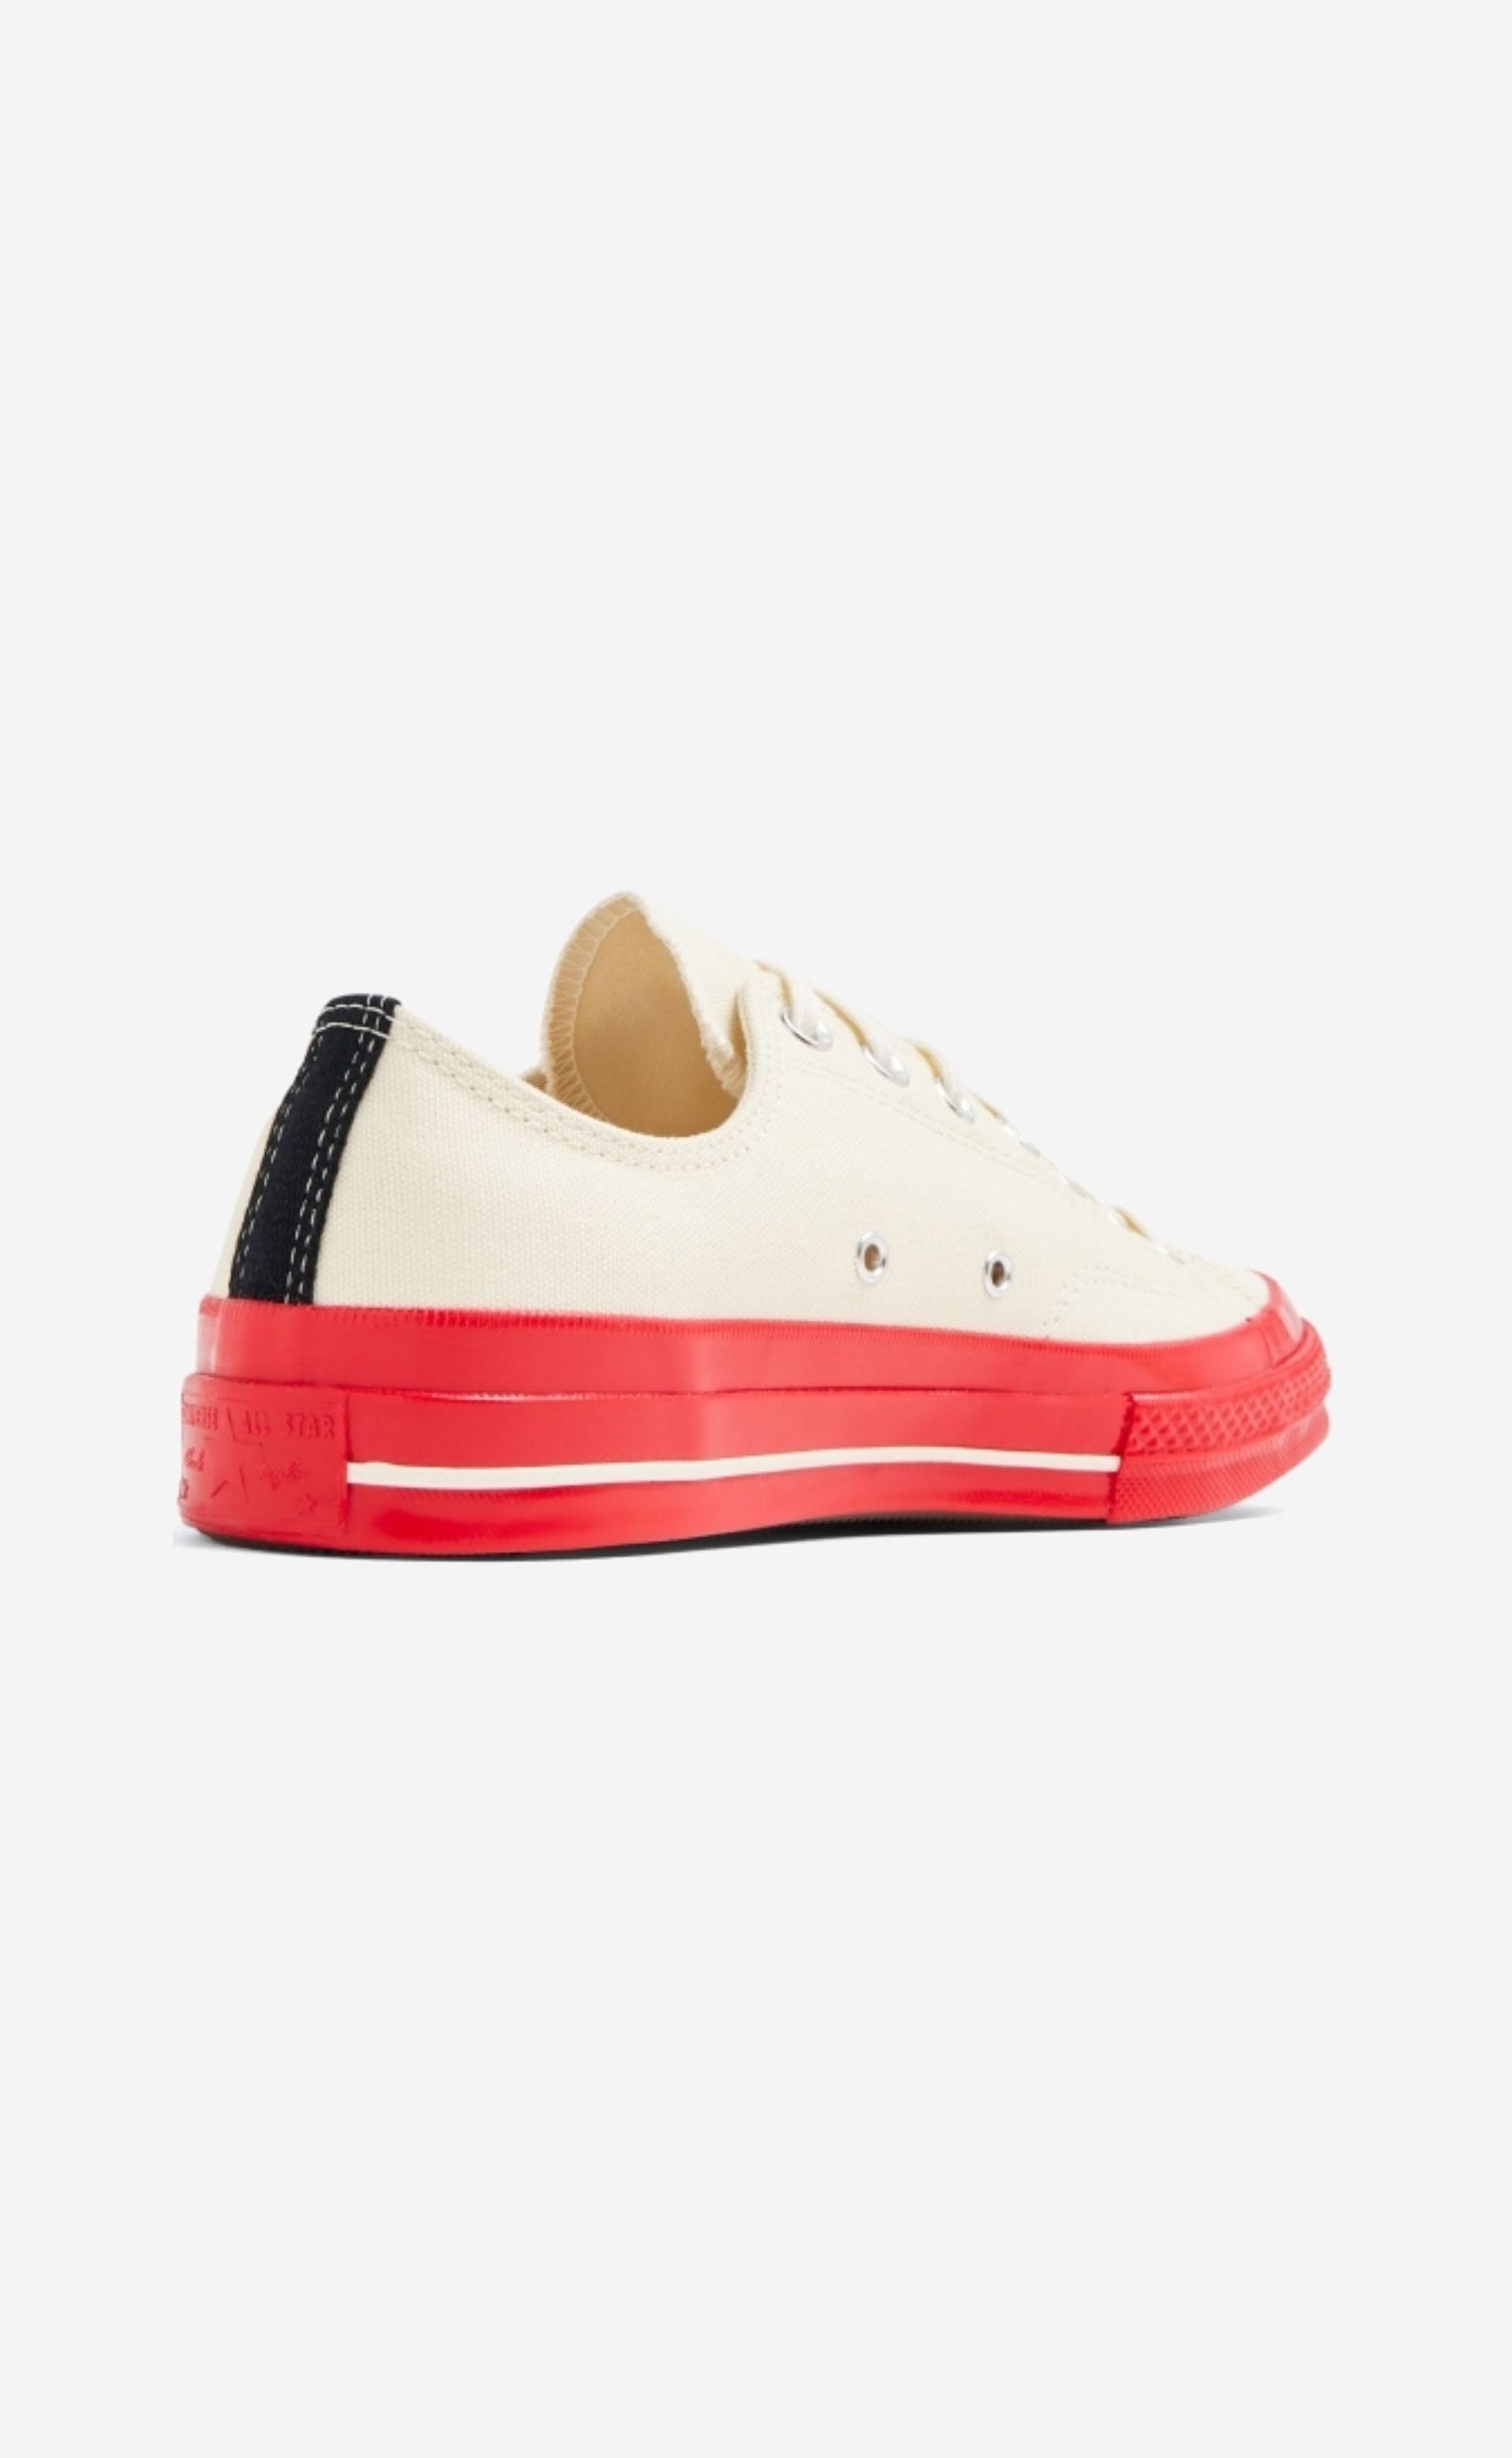 OFF WHITE PLAY COMME DES GARÇONS X CONVERSE RED SOLE CHUCK 70 LOW TOP